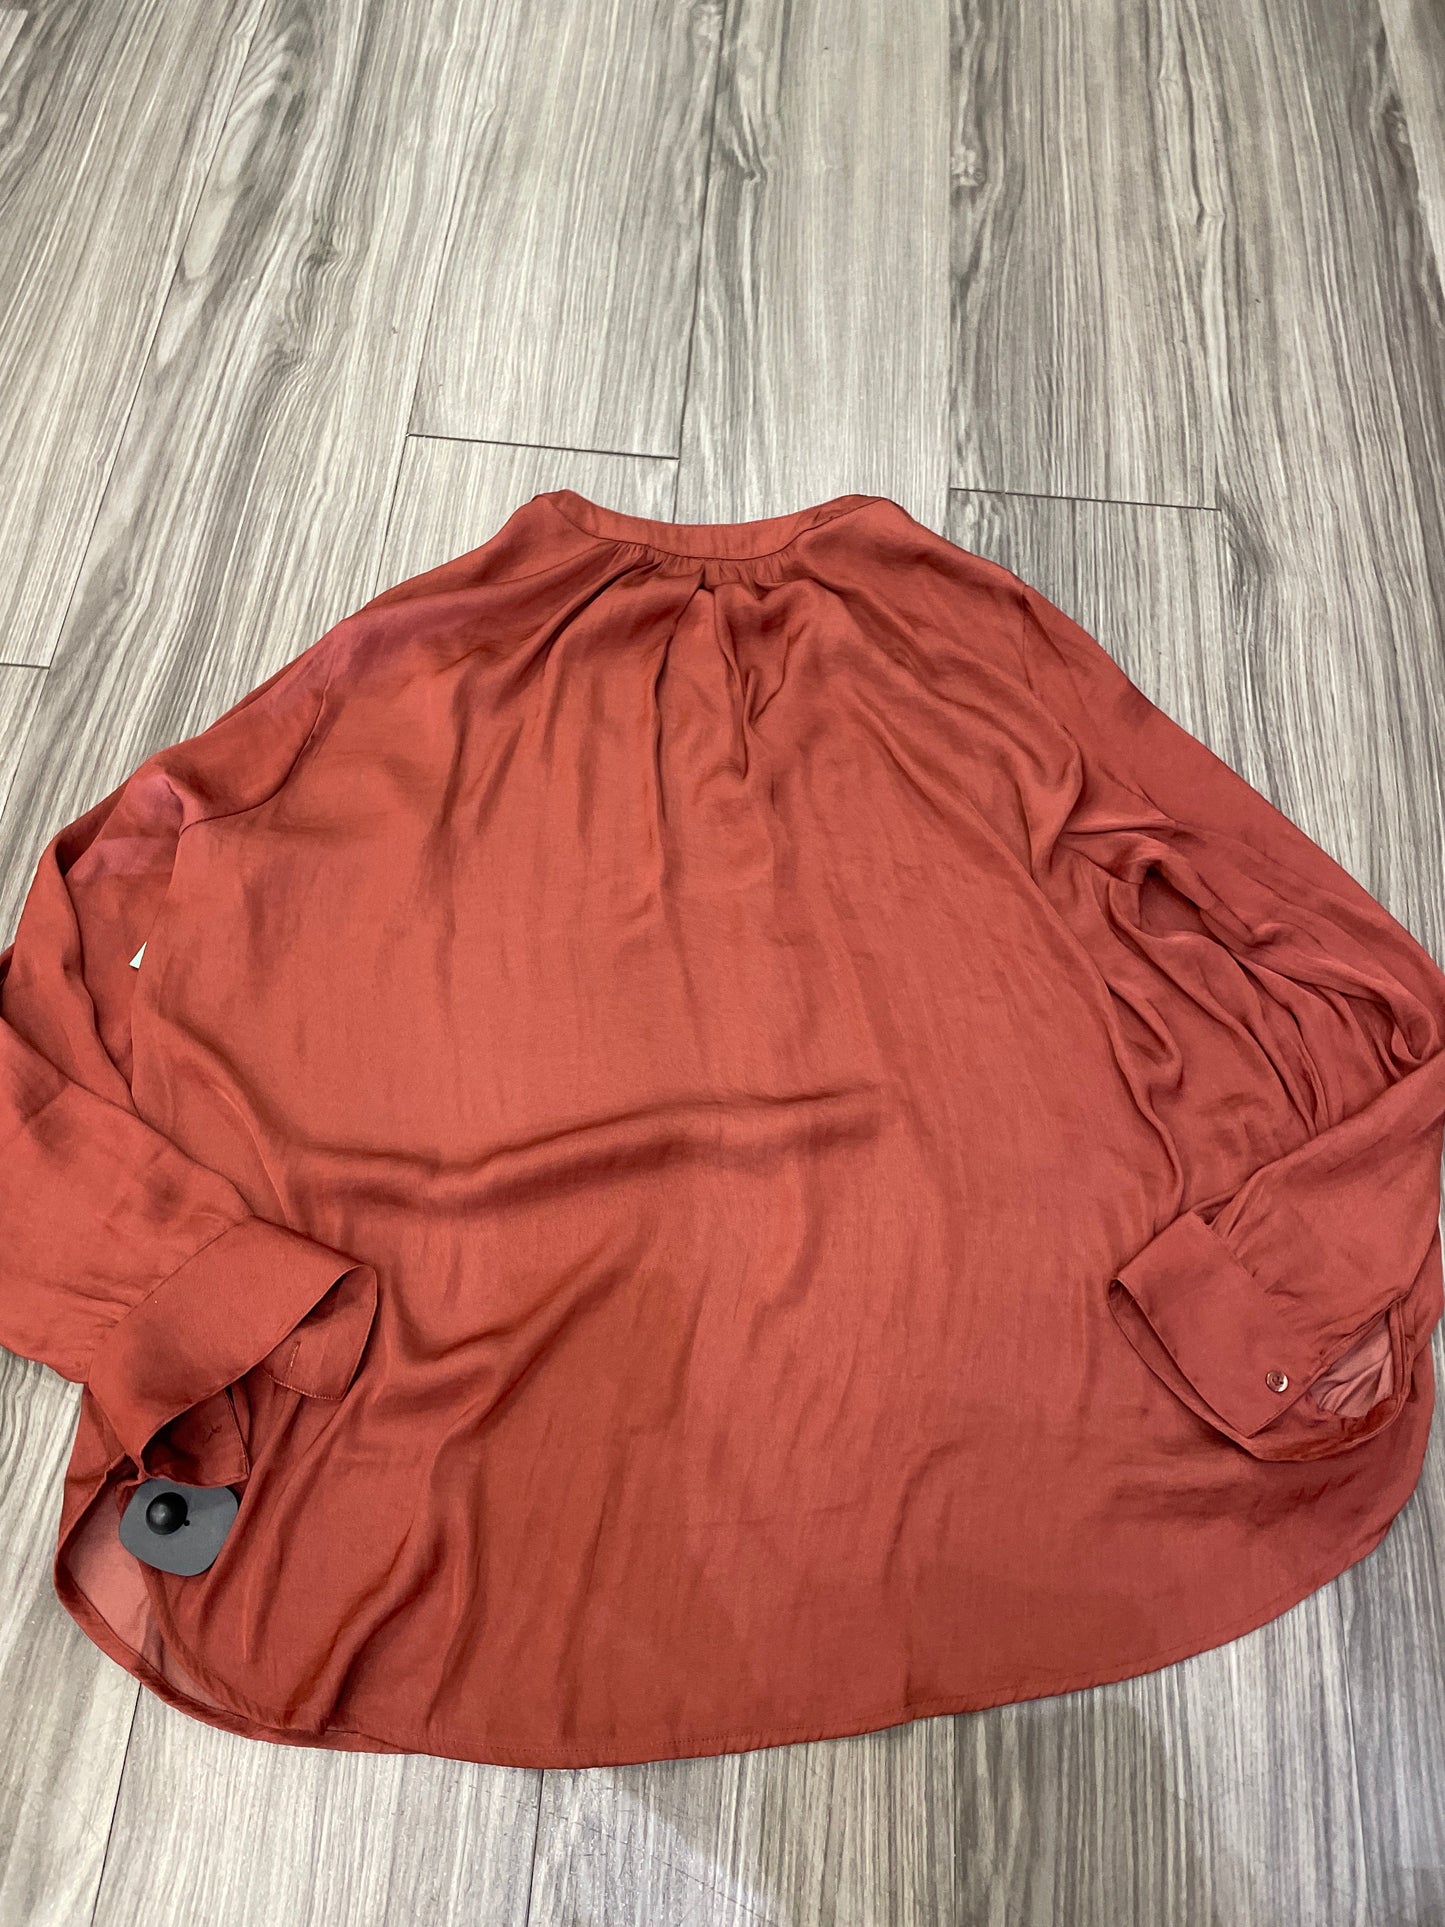 Red Top Long Sleeve Simply Vera, Size Xxl